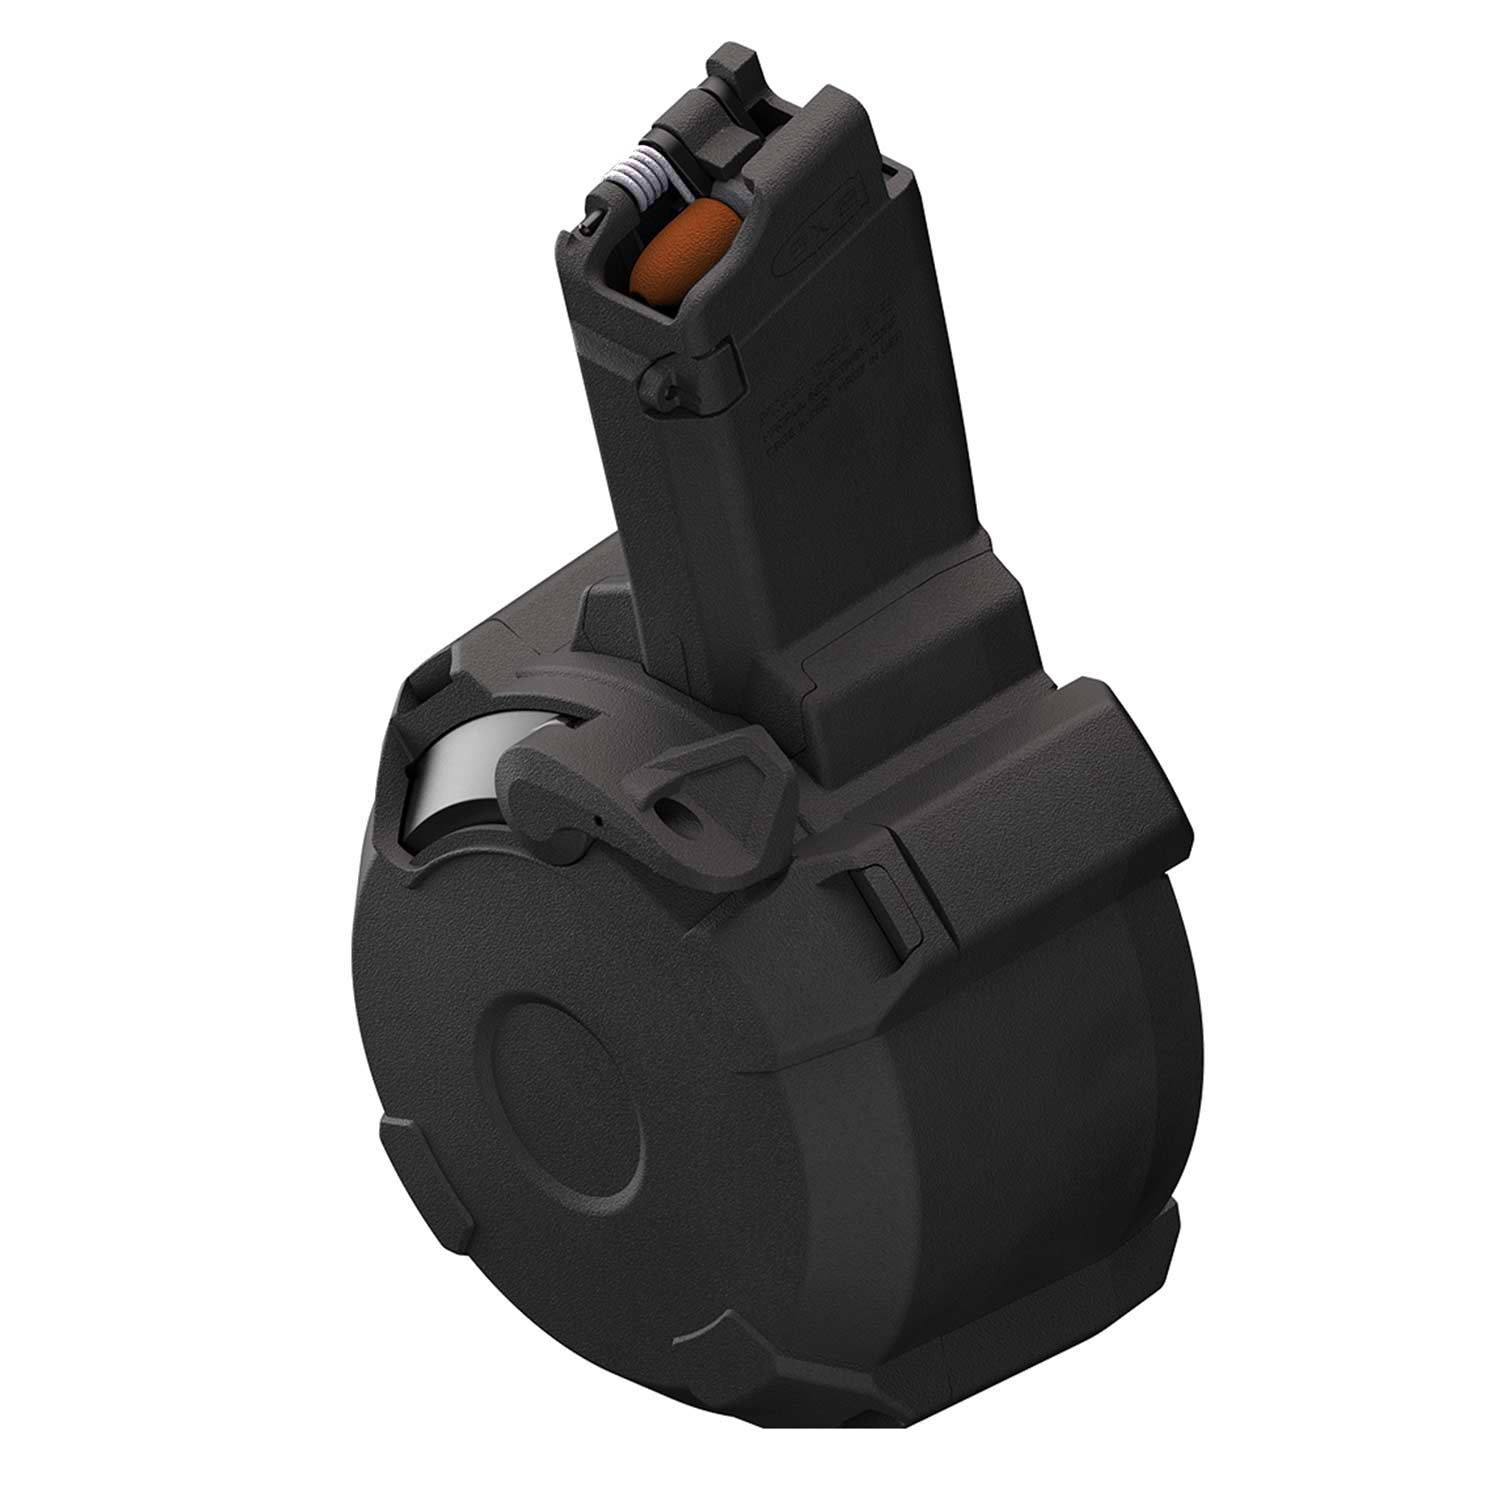 ...this drum style magazine can hold up to 50 9mm rounds and fits into larg...